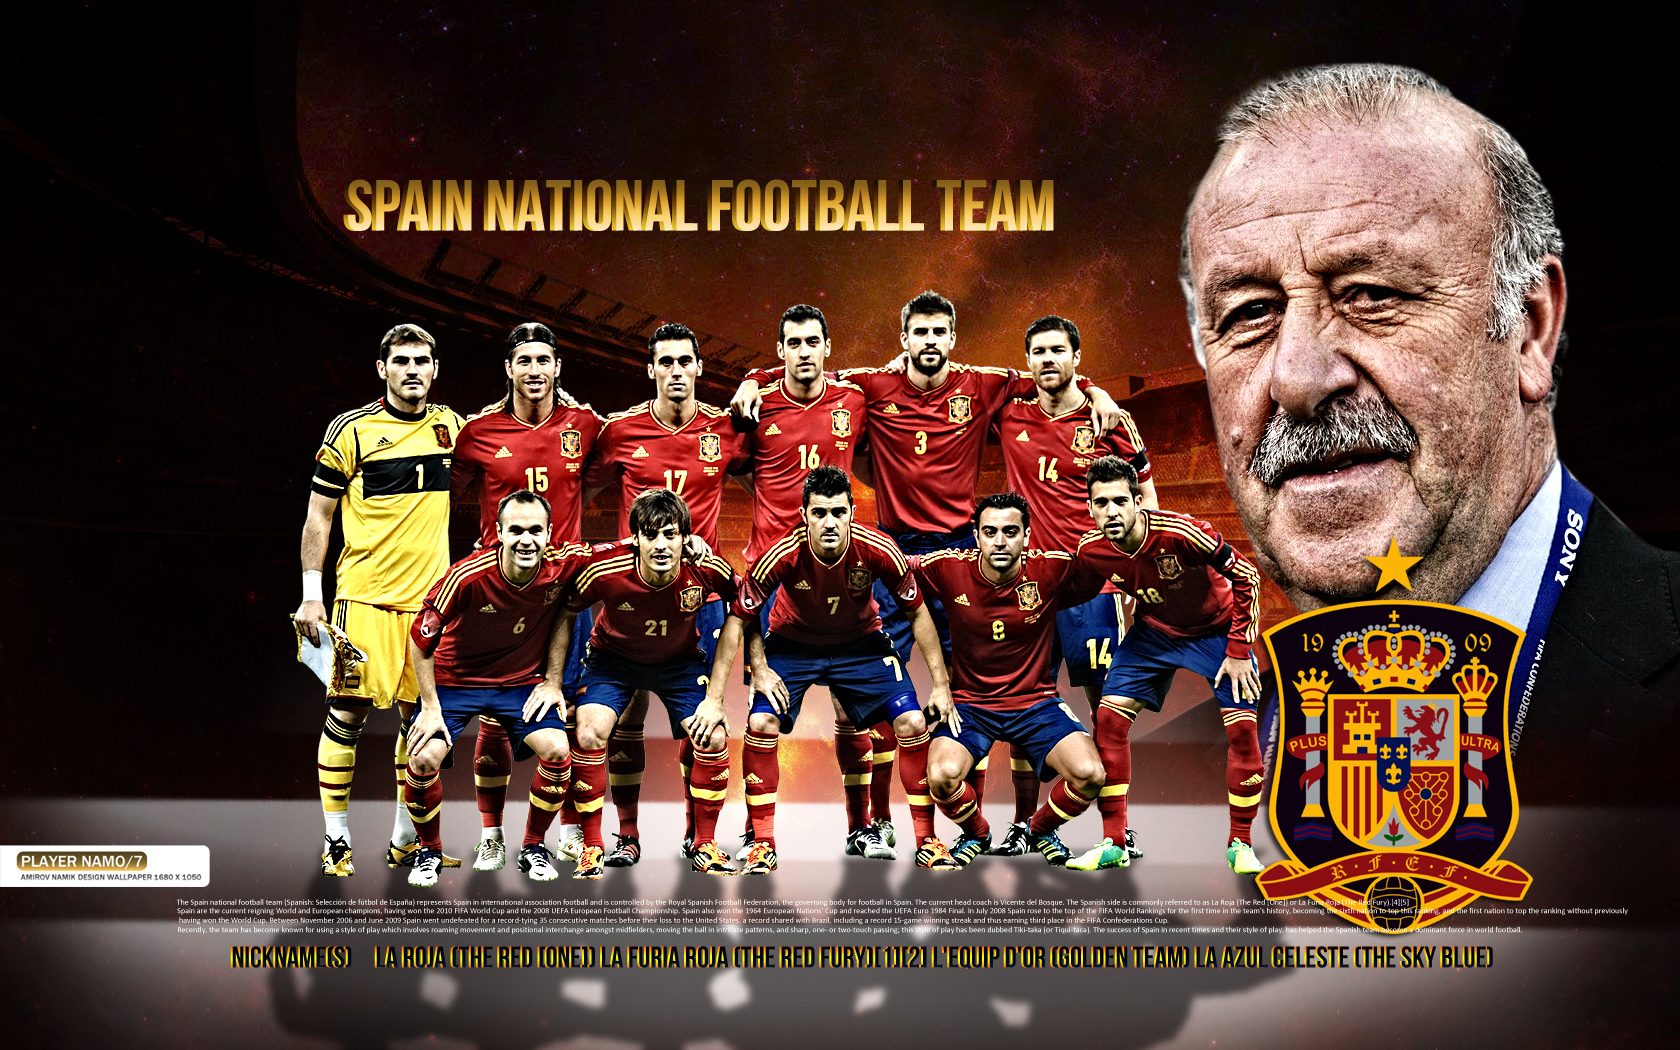 Spain National Football Team Picture by Namik Amirov